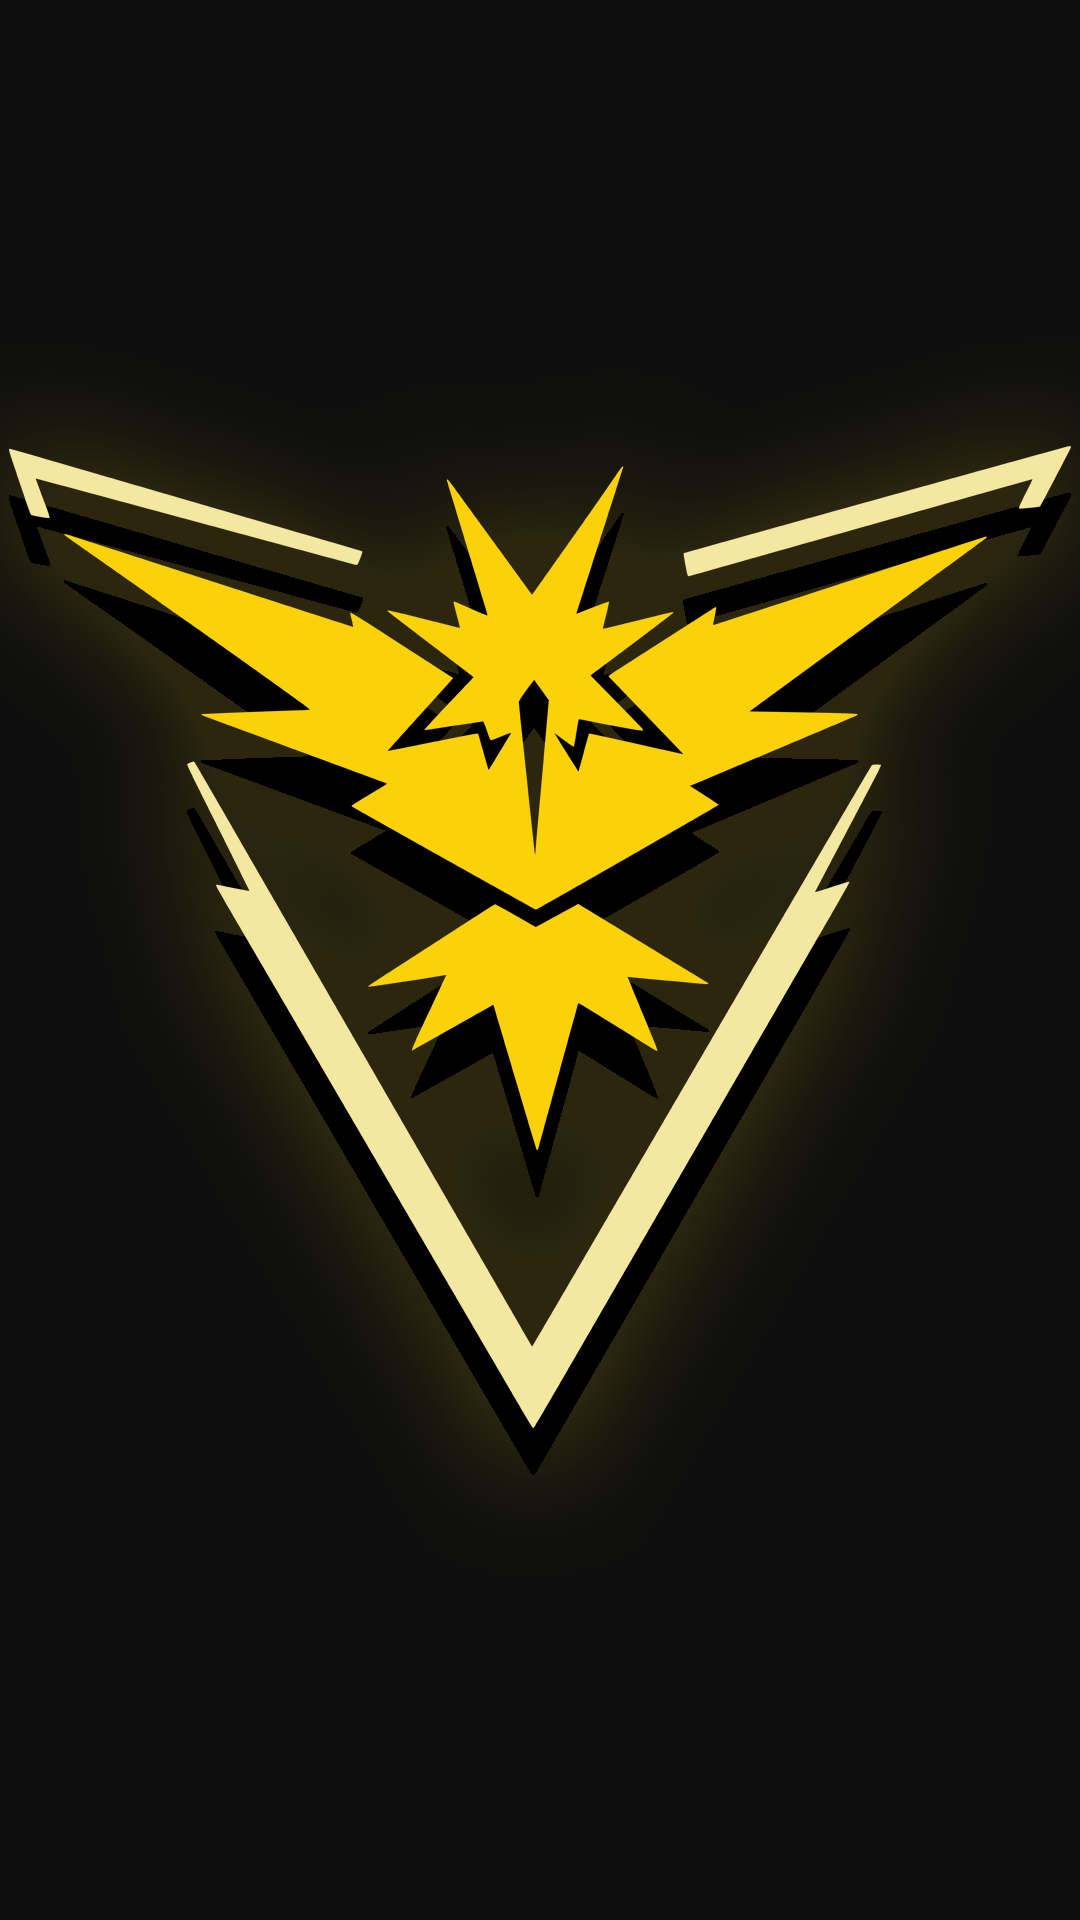 You are nothing without Team Instinct.